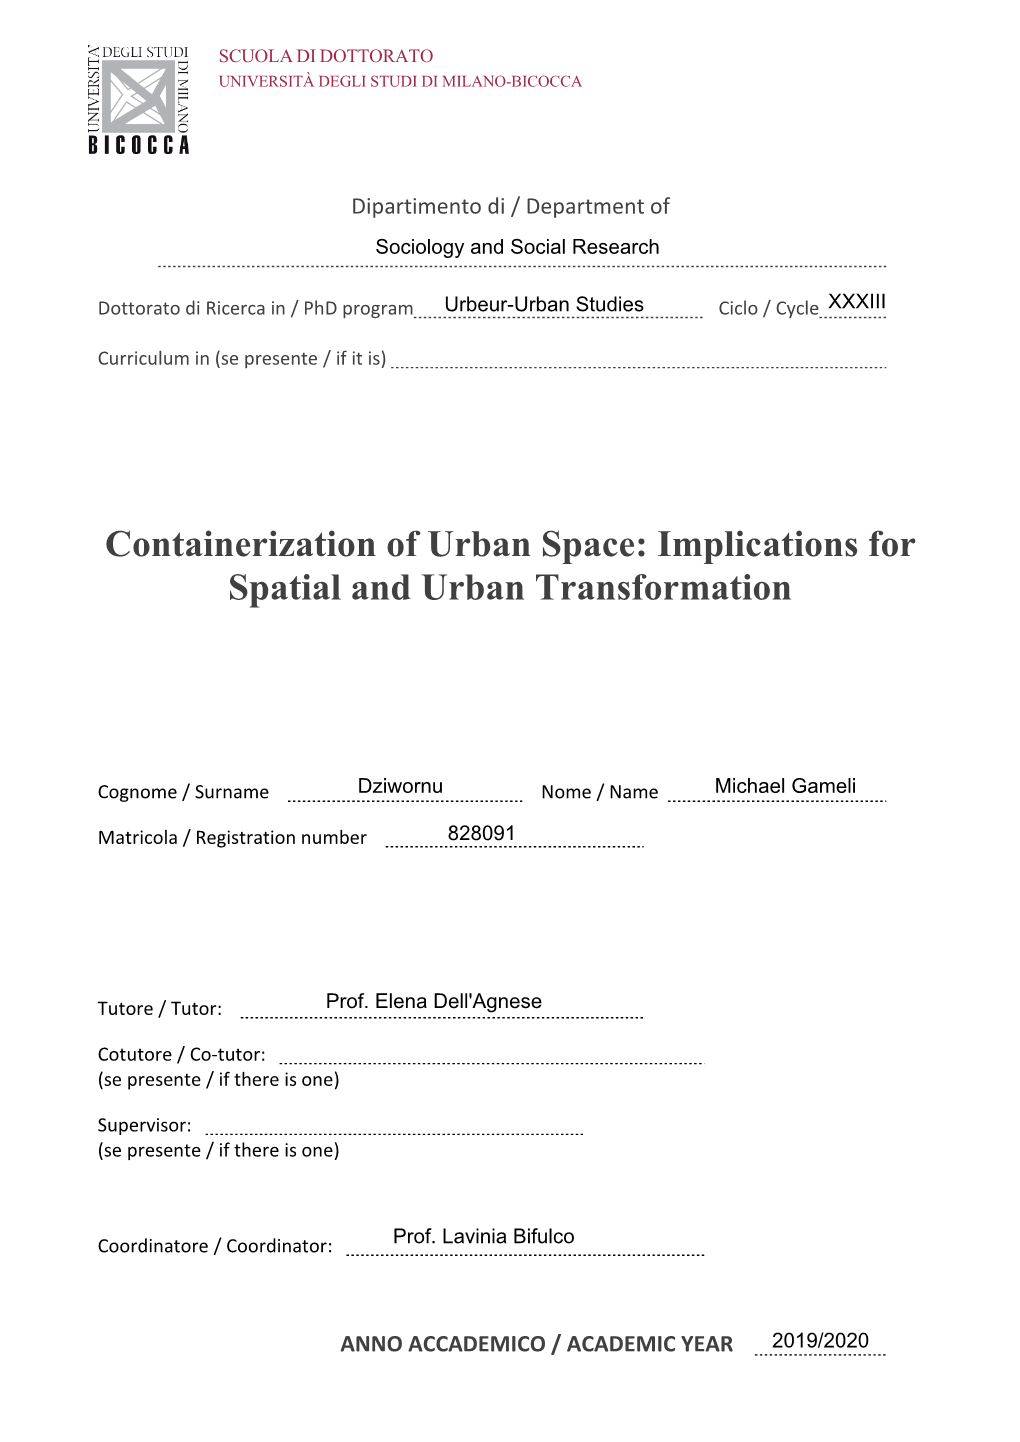 Containerization of Urban Space: Implications for Spatial and Urban Transformation